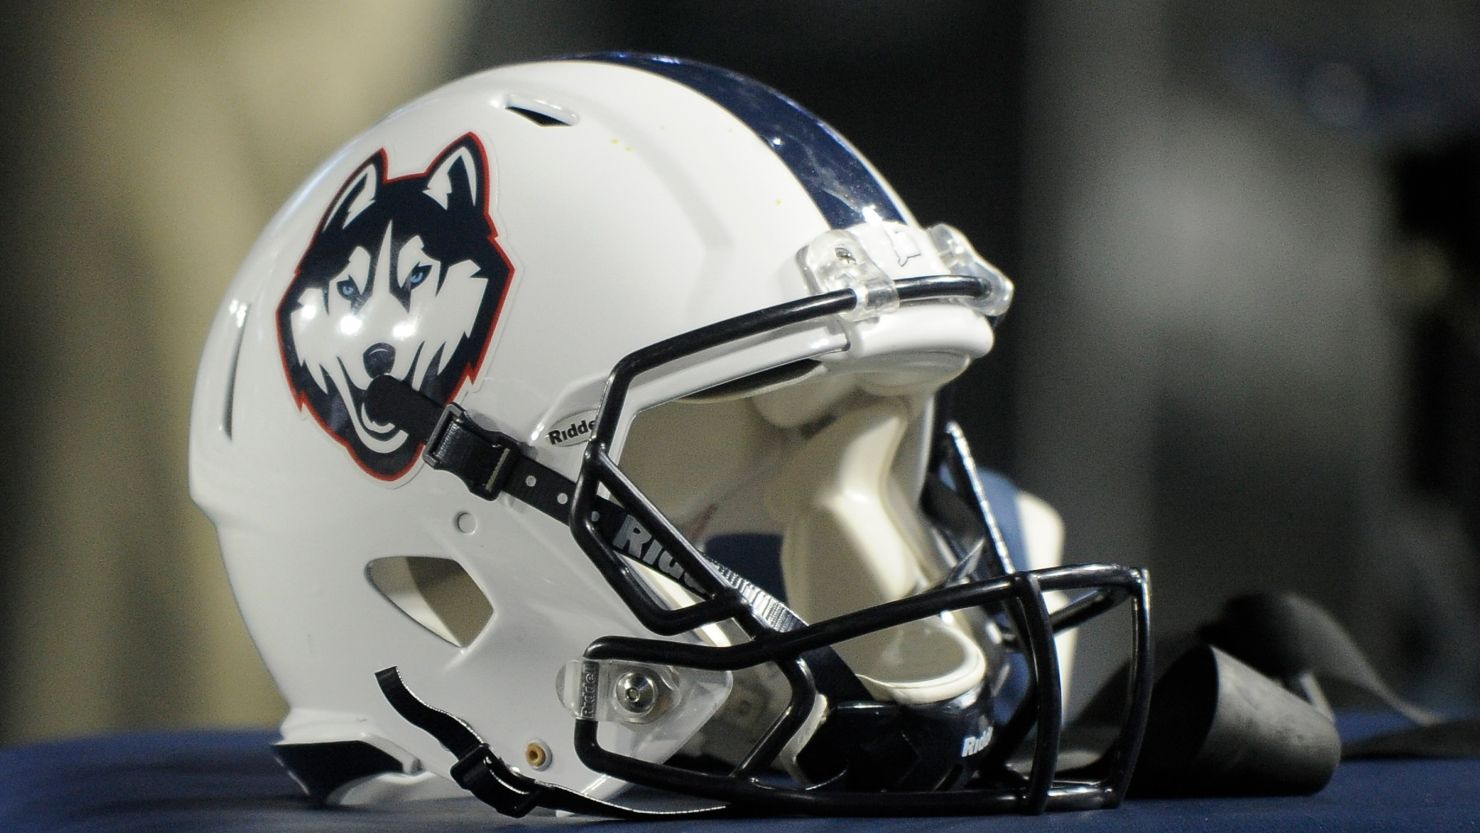 The Connecticut Huskies were slated to compete as an independent in 2020.